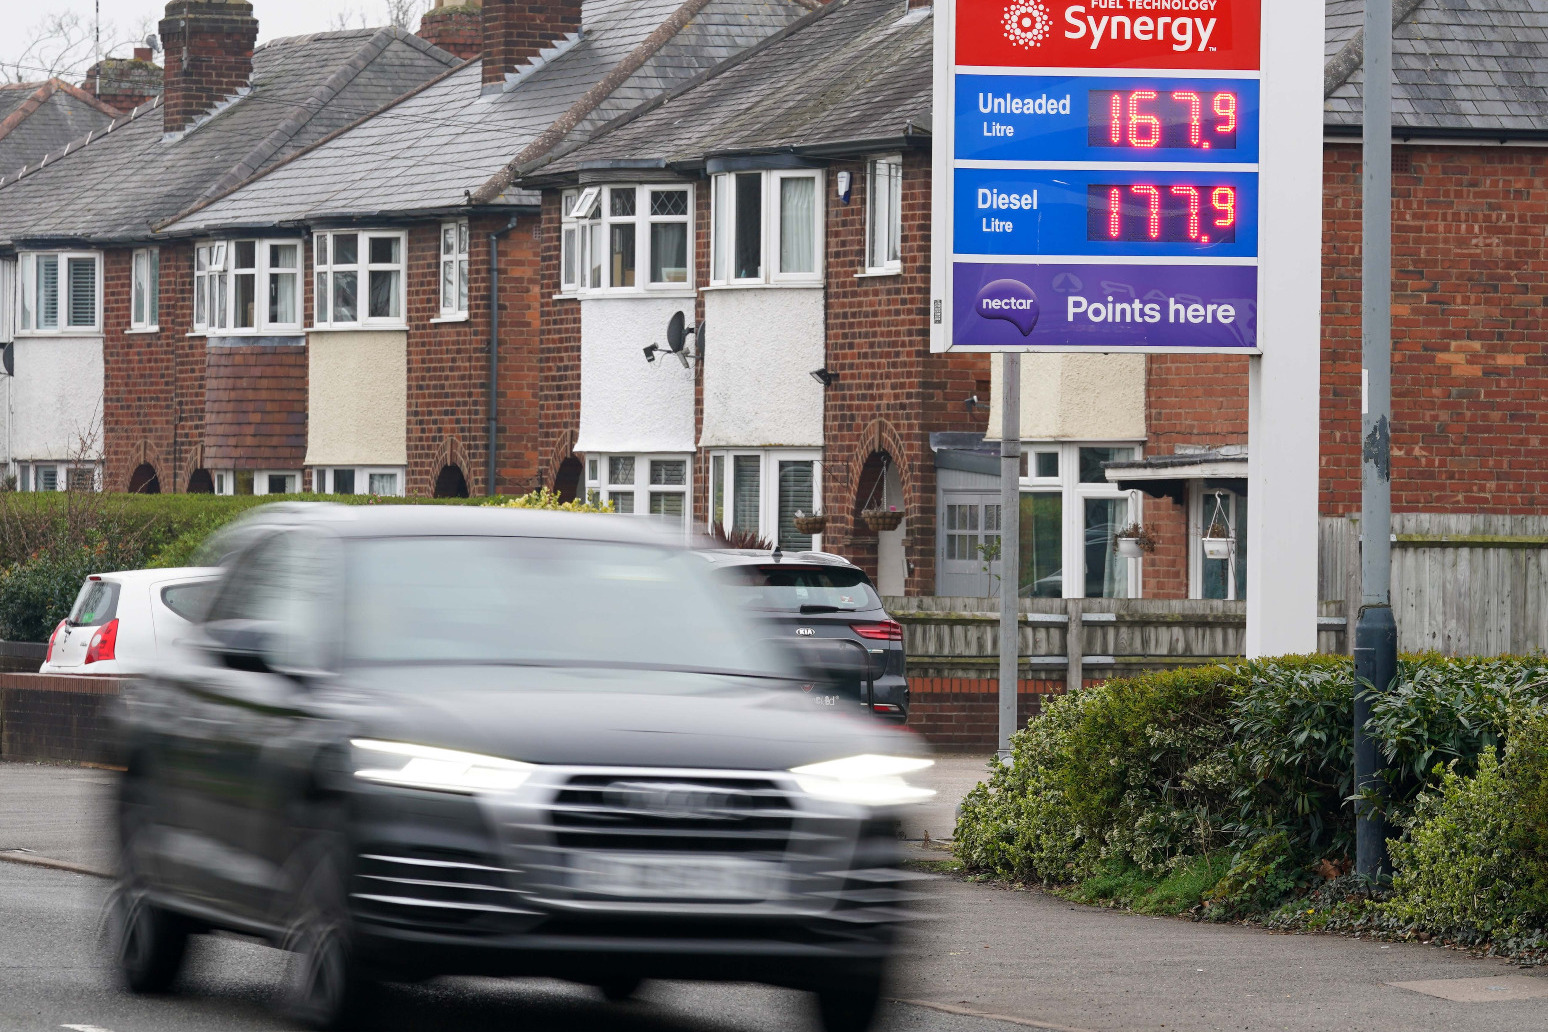 Nurses ‘need more cash for soaring petrol prices’ to get to patients 